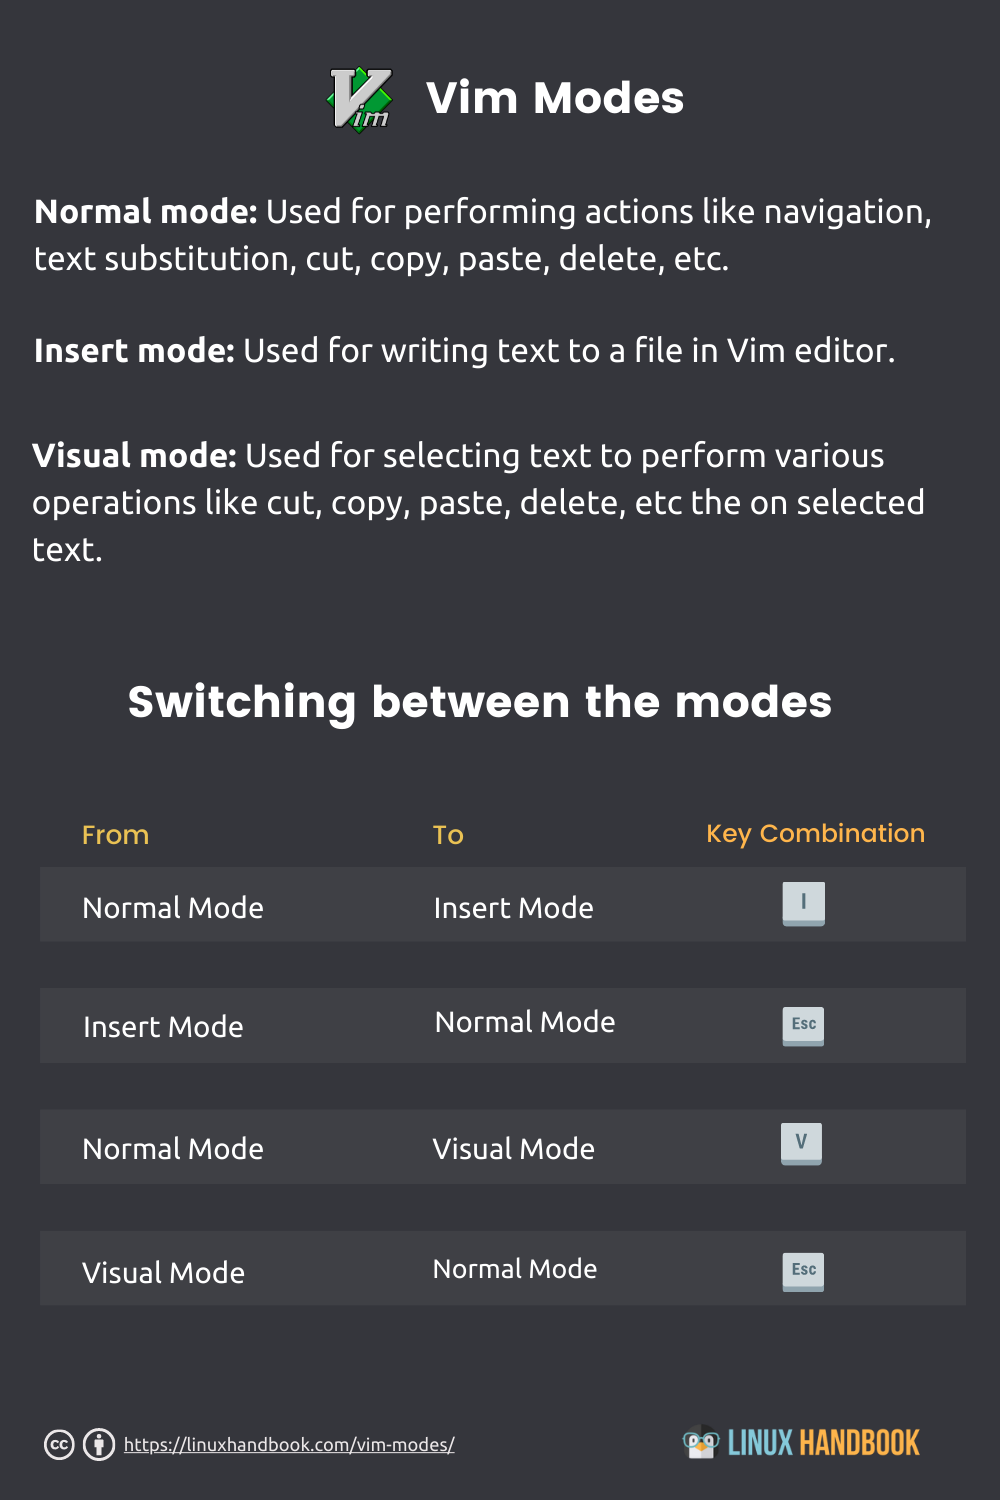 cheat sheet for switching modes in Vim